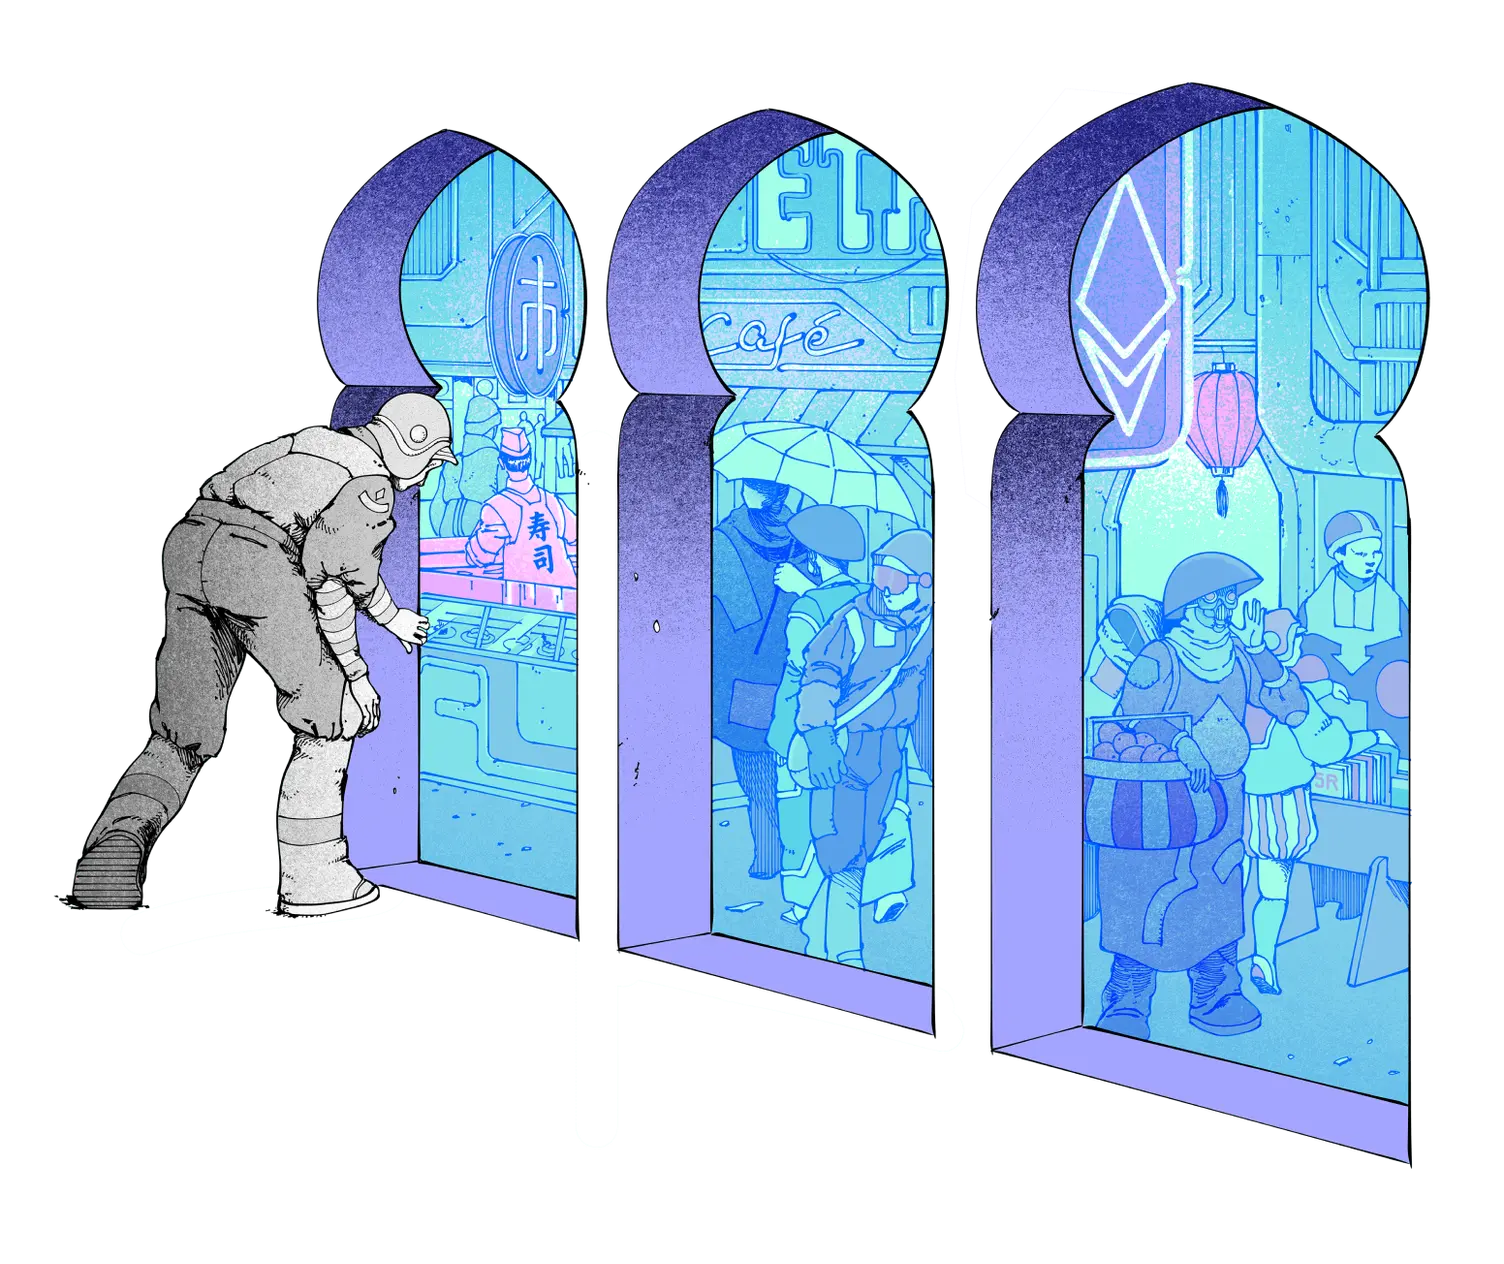 Illustration of a person peering into a bazaar, meant to represent Ethereum.